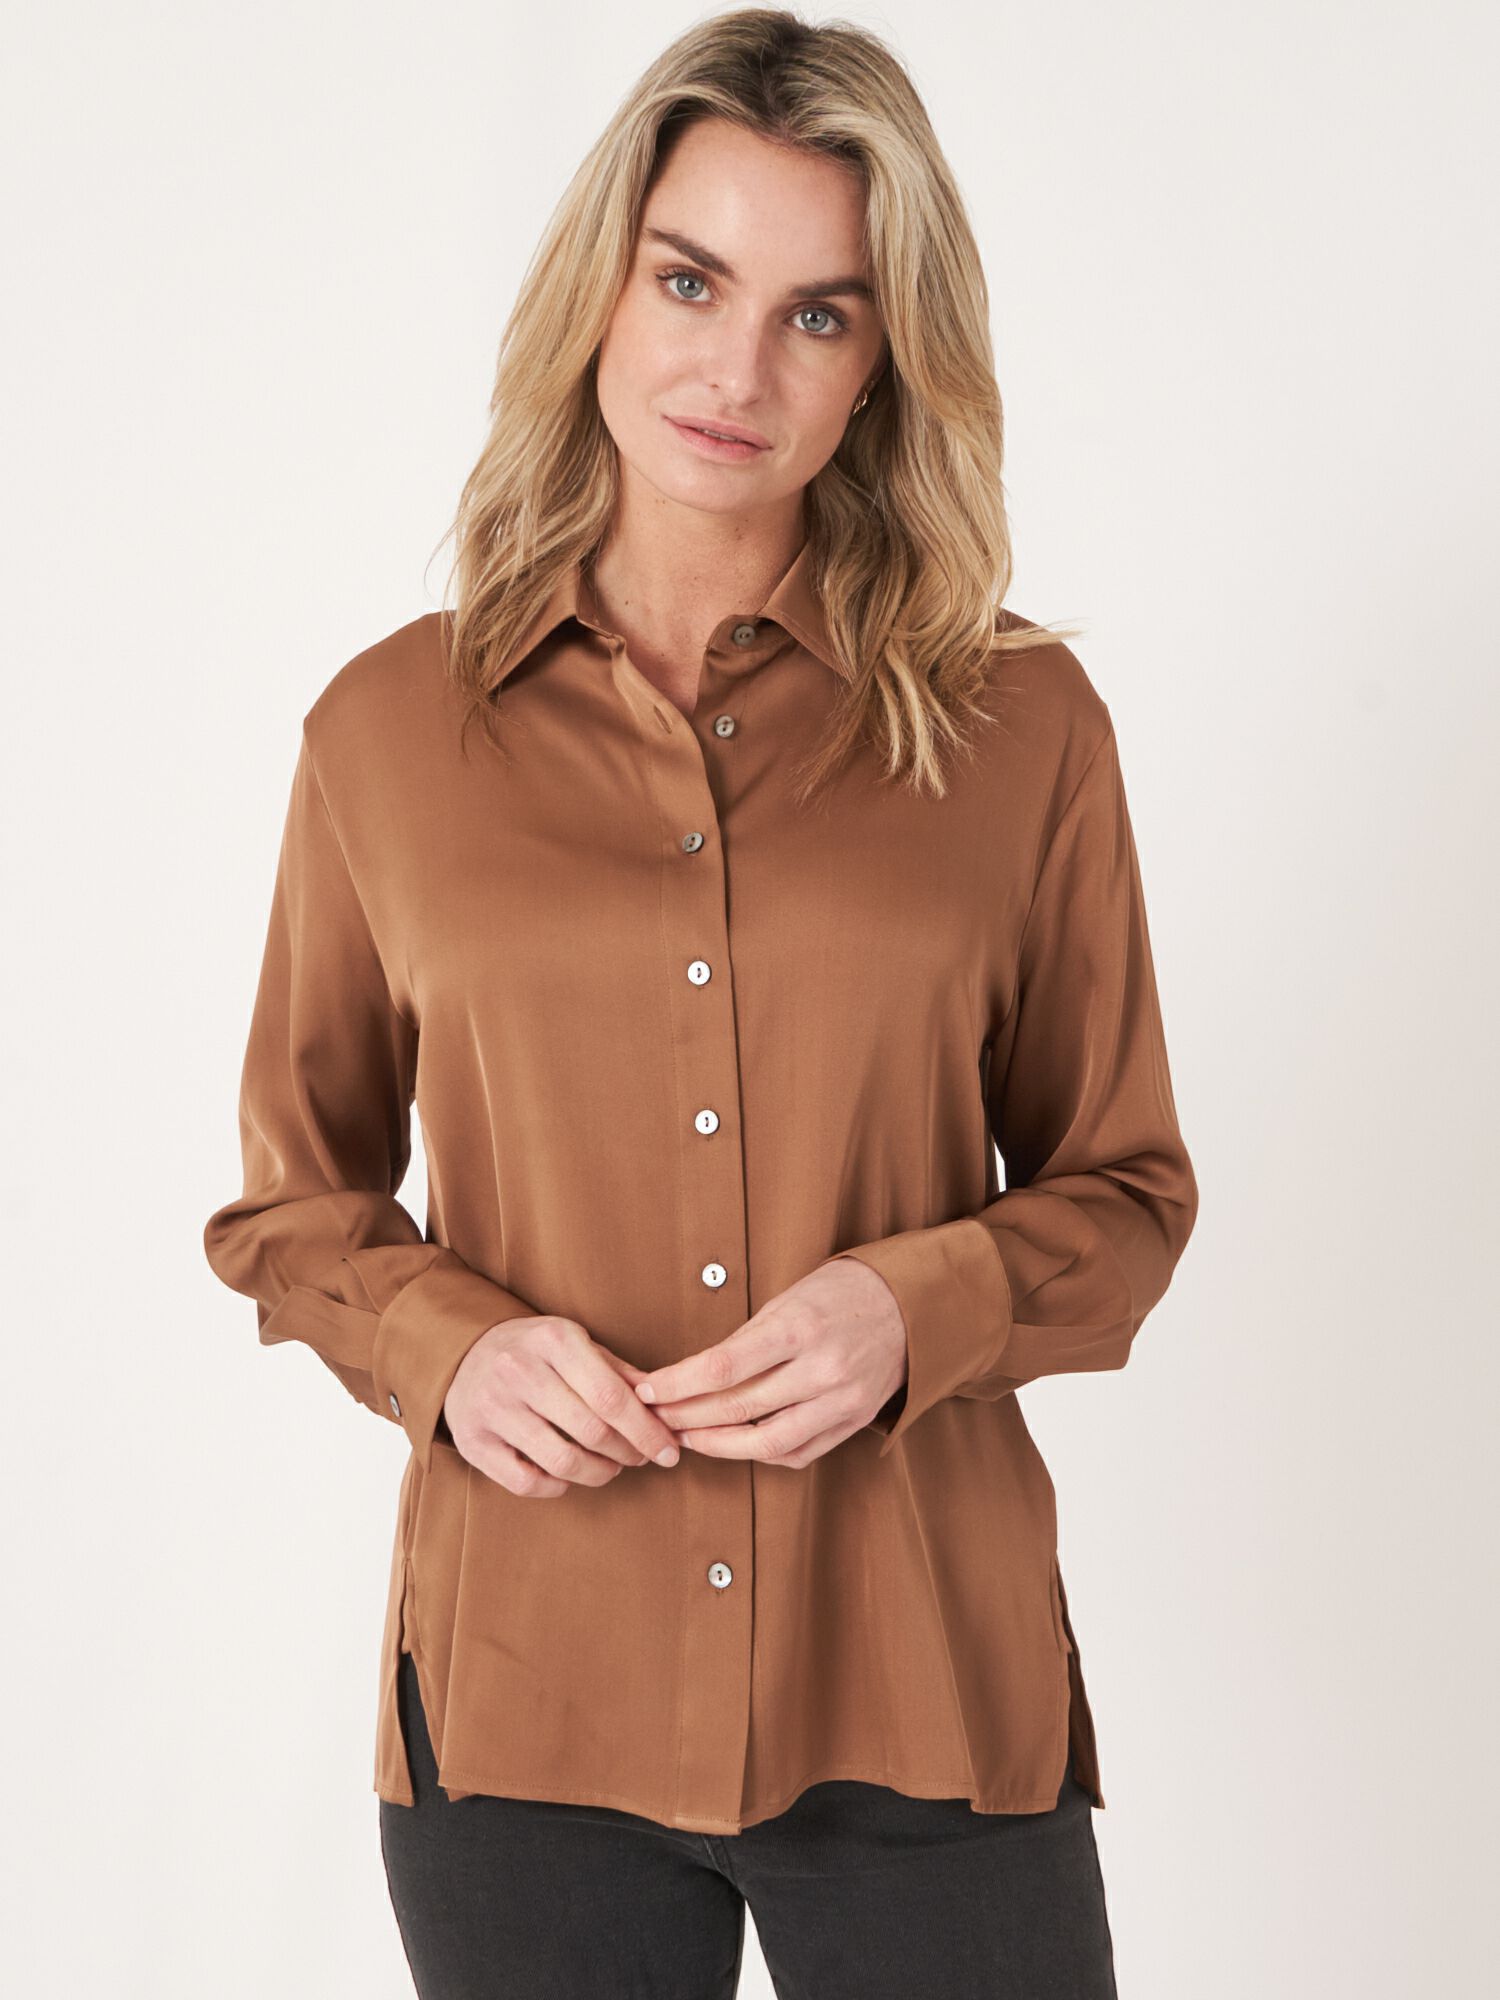 Silk shirt with chest pocket side and slits